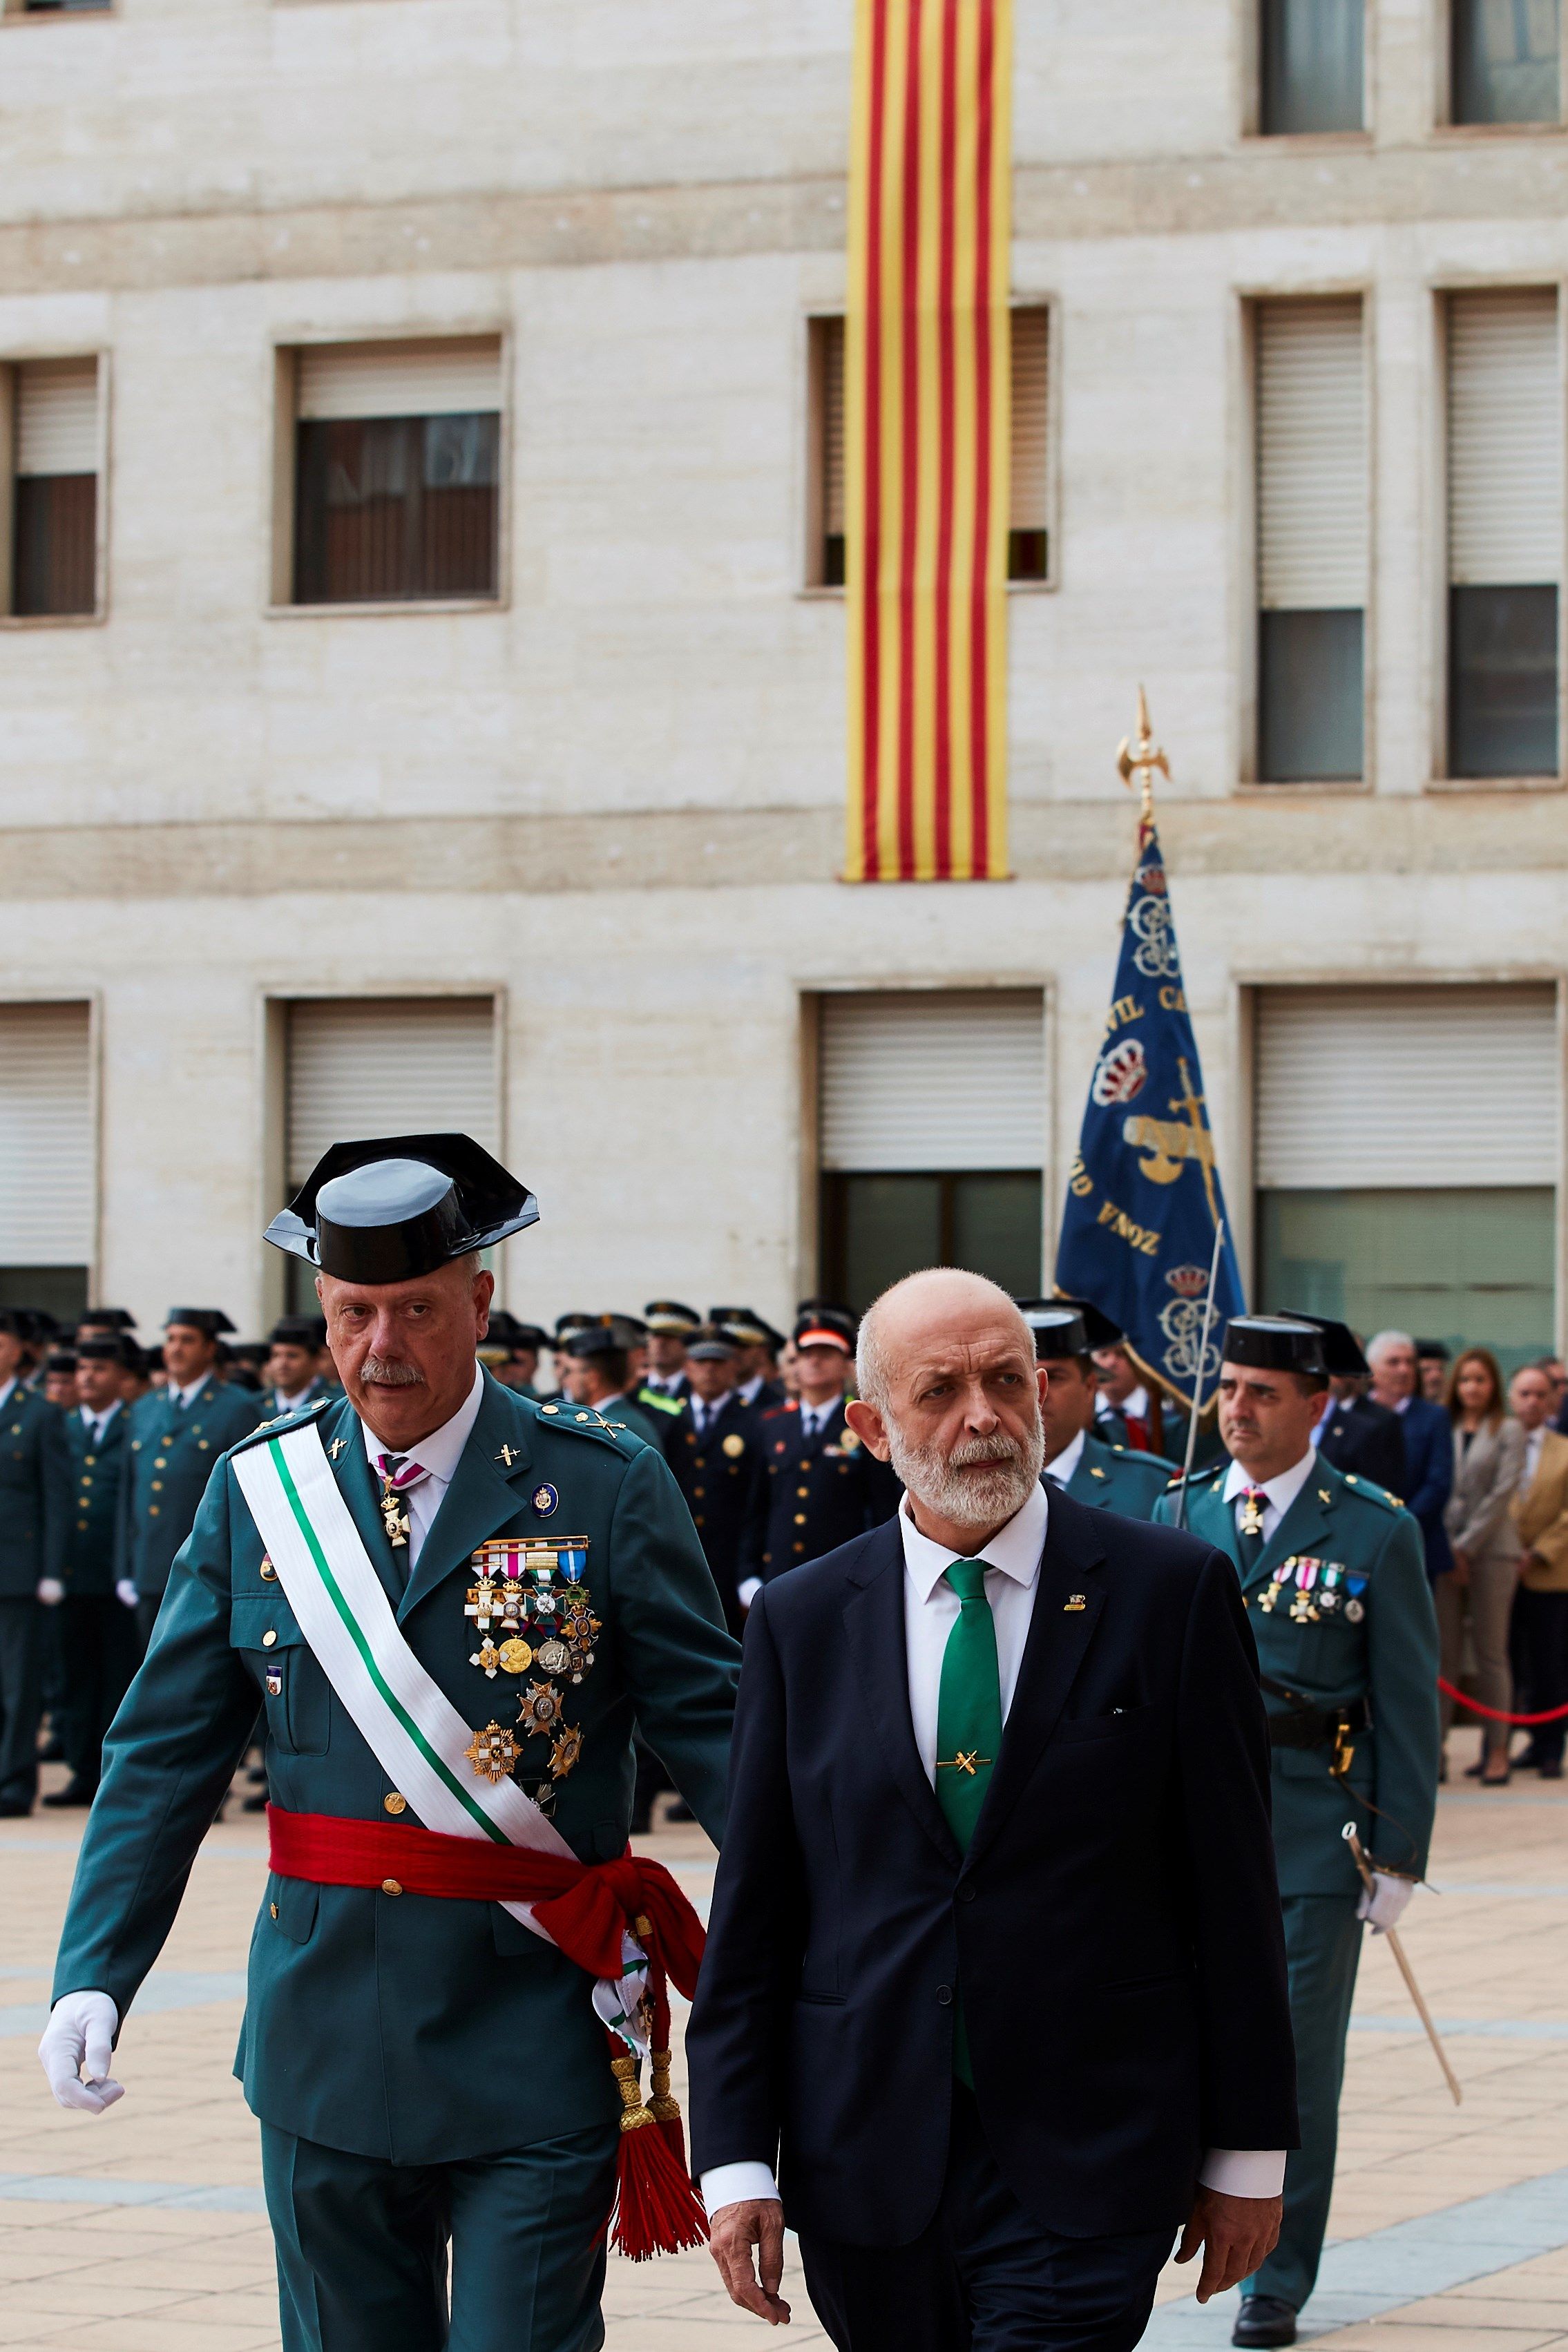 Spanish Civil Guard boasts of "having helped to convict" jailed Catalan leaders